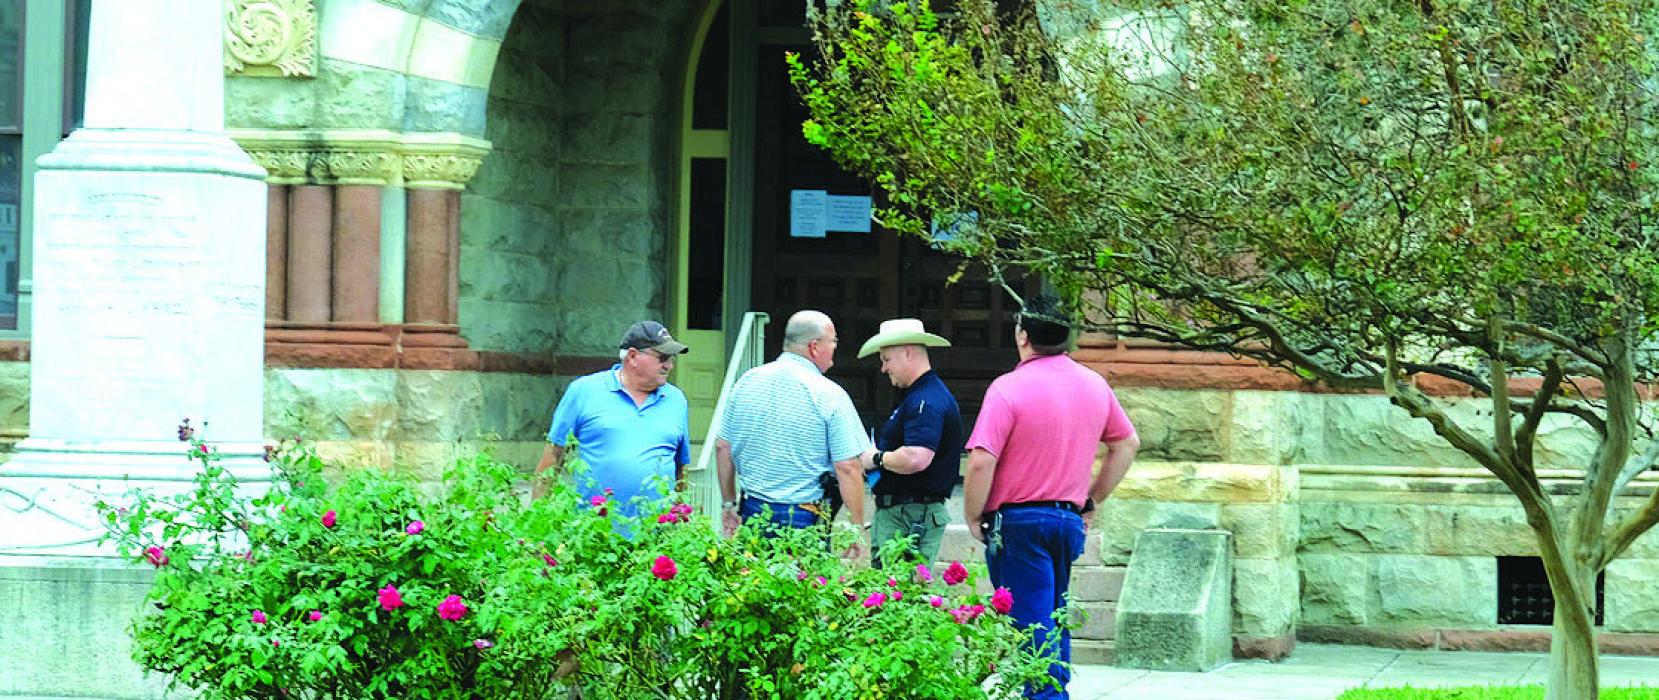 Deputies with the Fayette County Sheriff’s Office meet outside the Courthouse in La Grange on Wednesday morning during their investigation into a burglary at the Courthouse. Photo by Andy Behlen